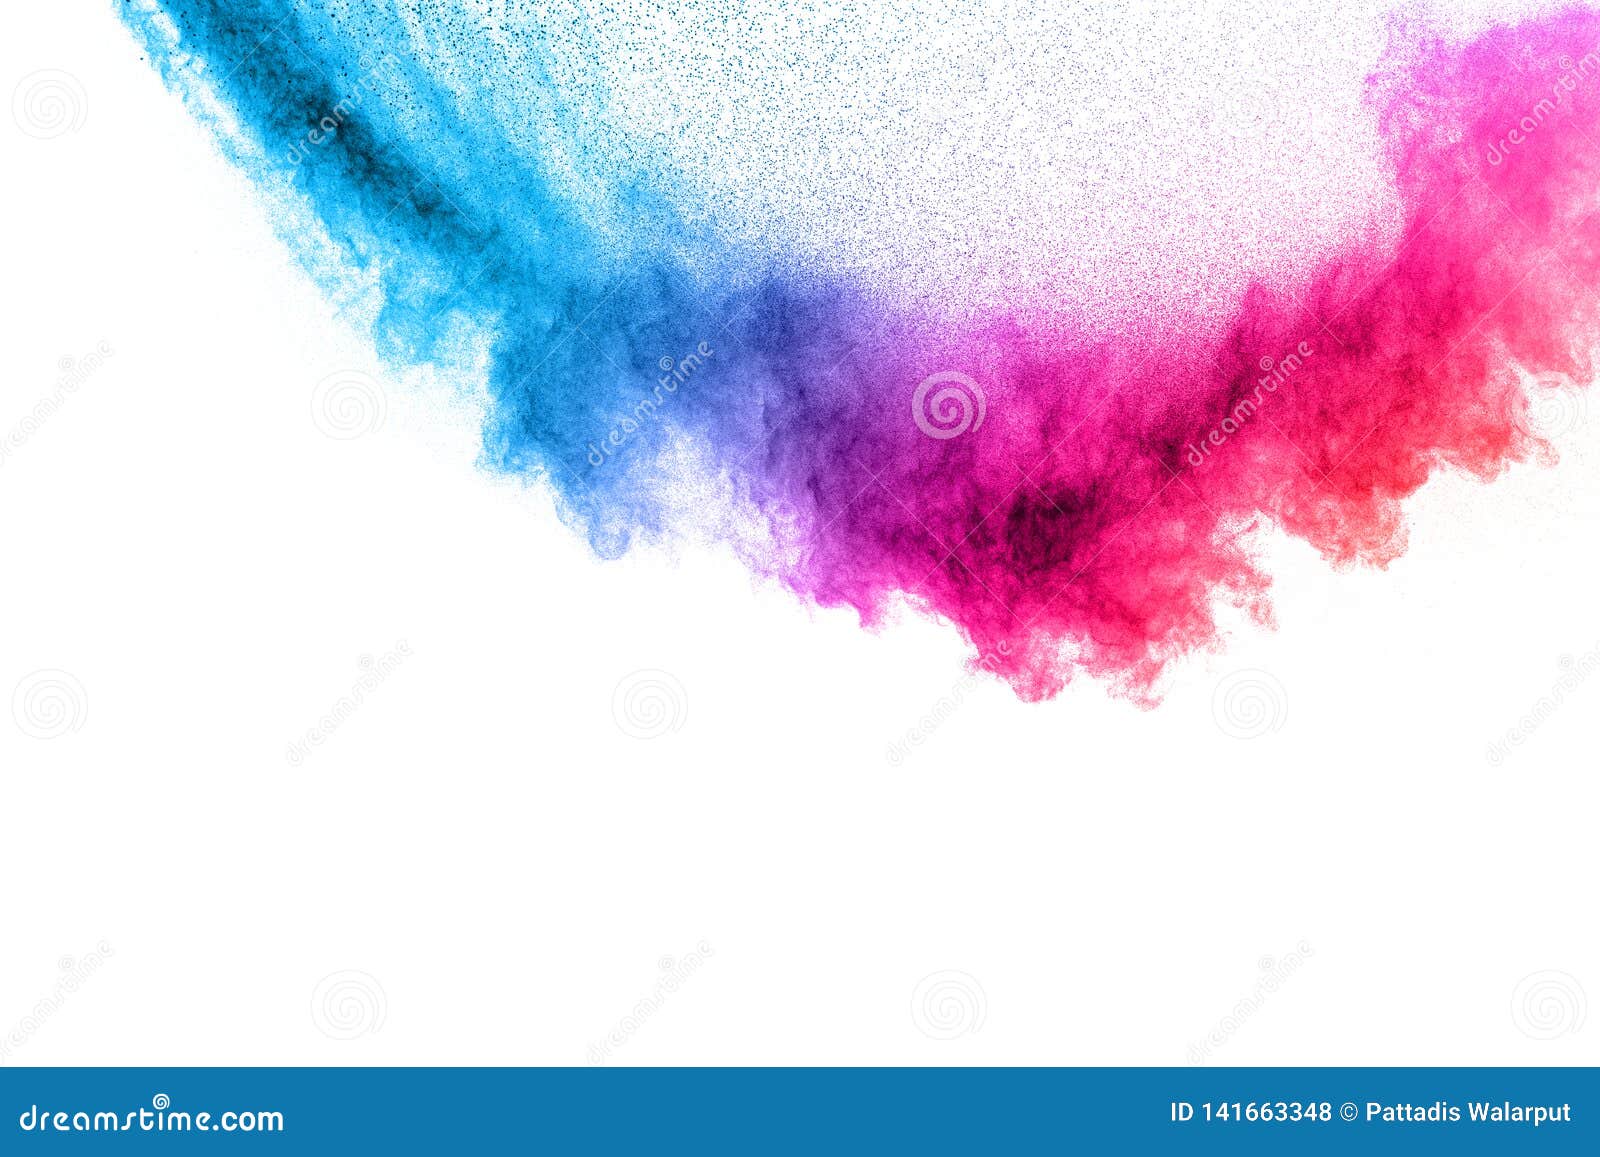 multi colour powder explosion on white background. launched colourful dust particles splashing